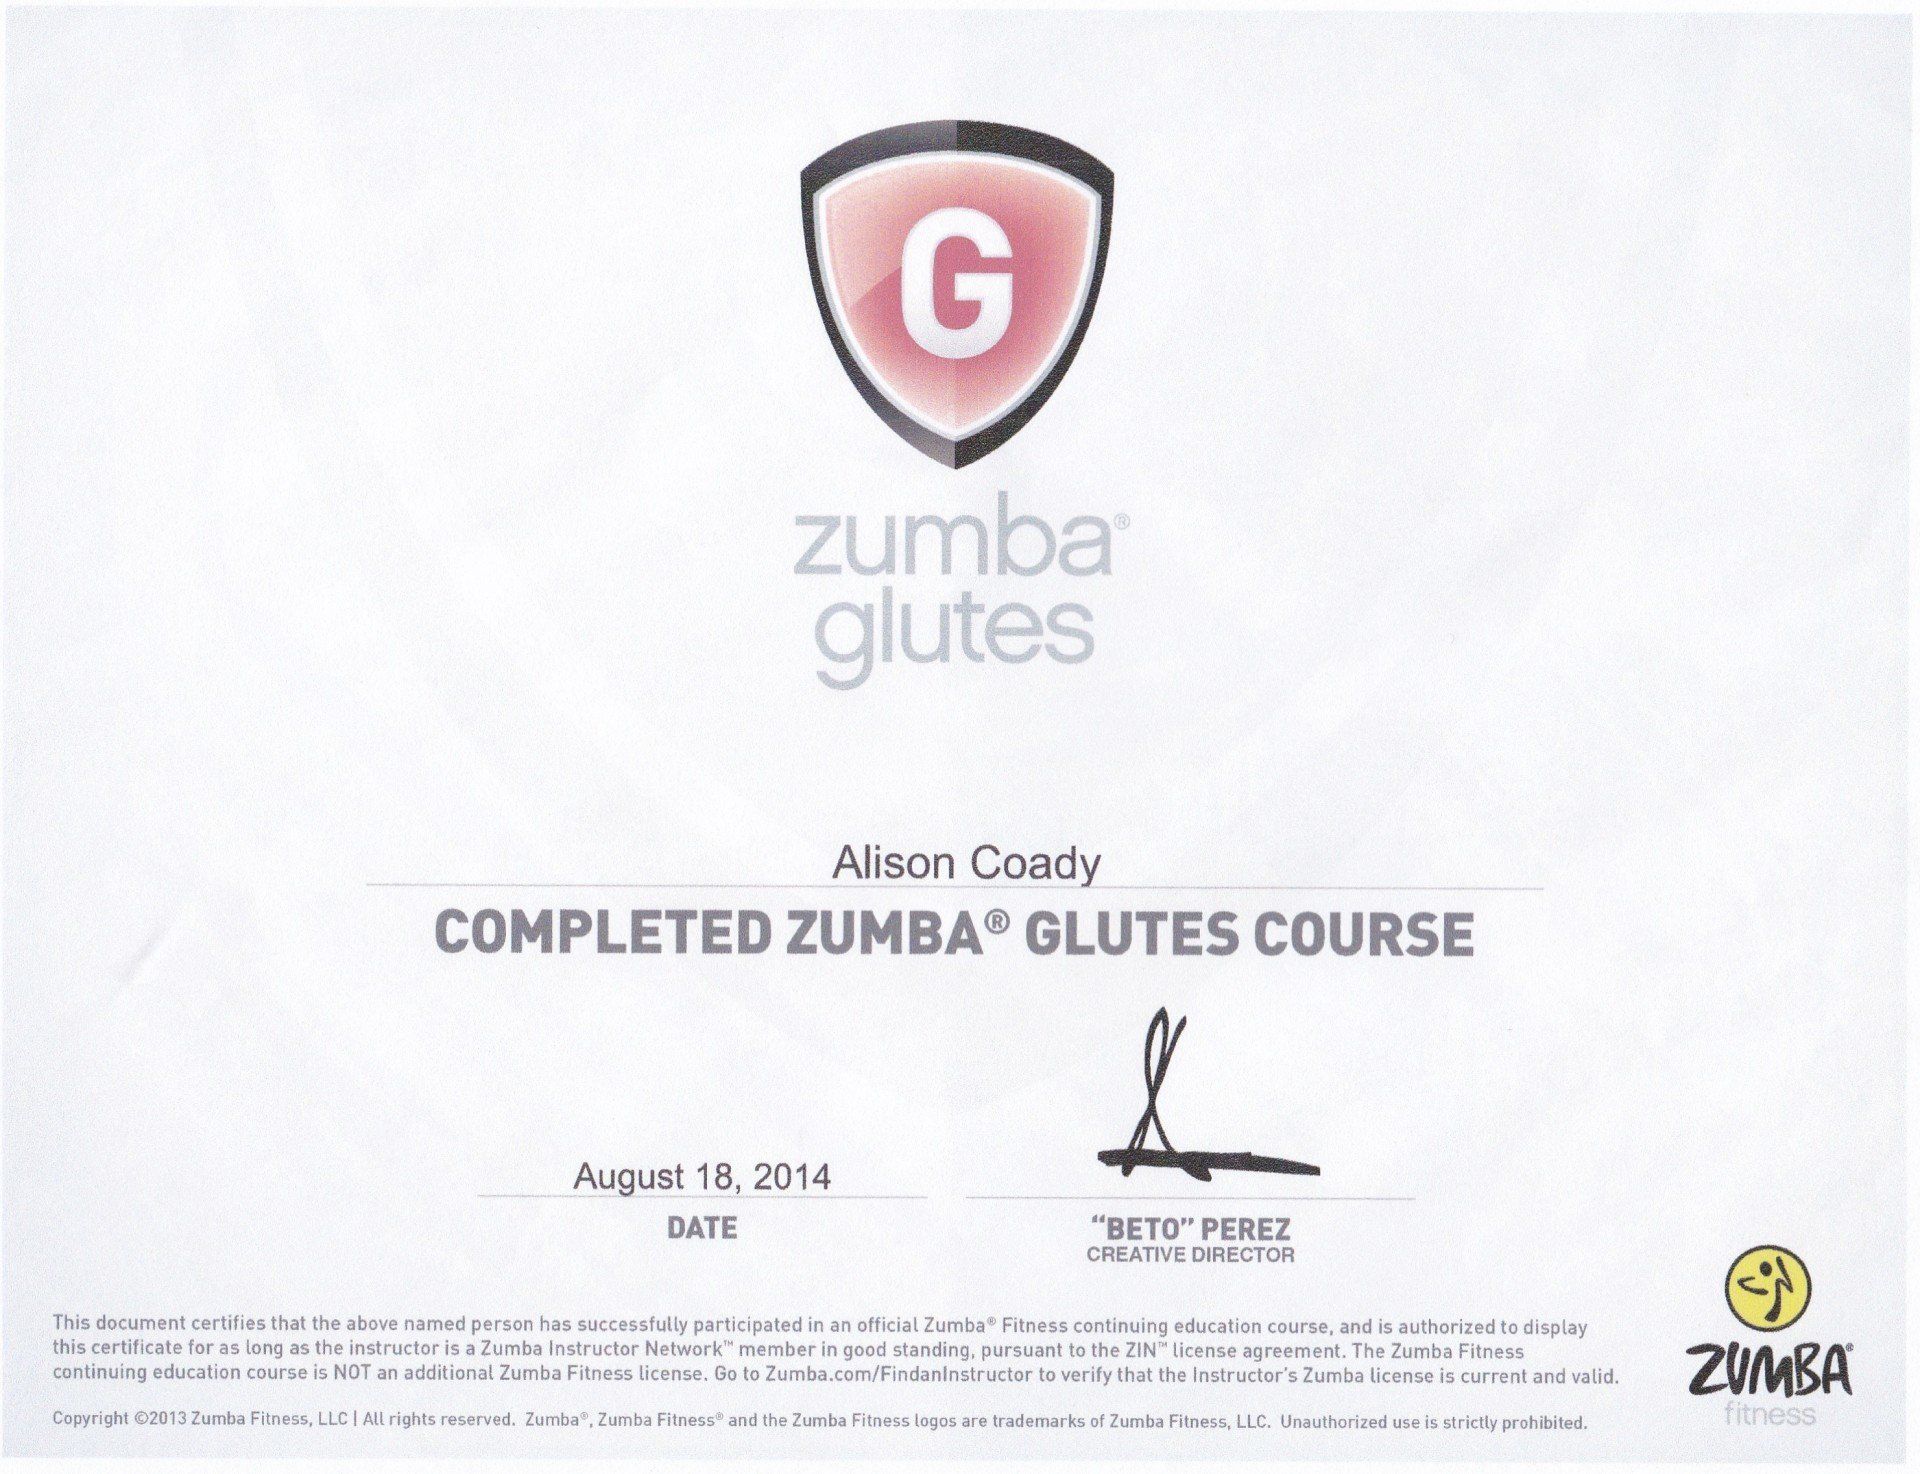 Zumba Glutes Certification - 18th August 2014